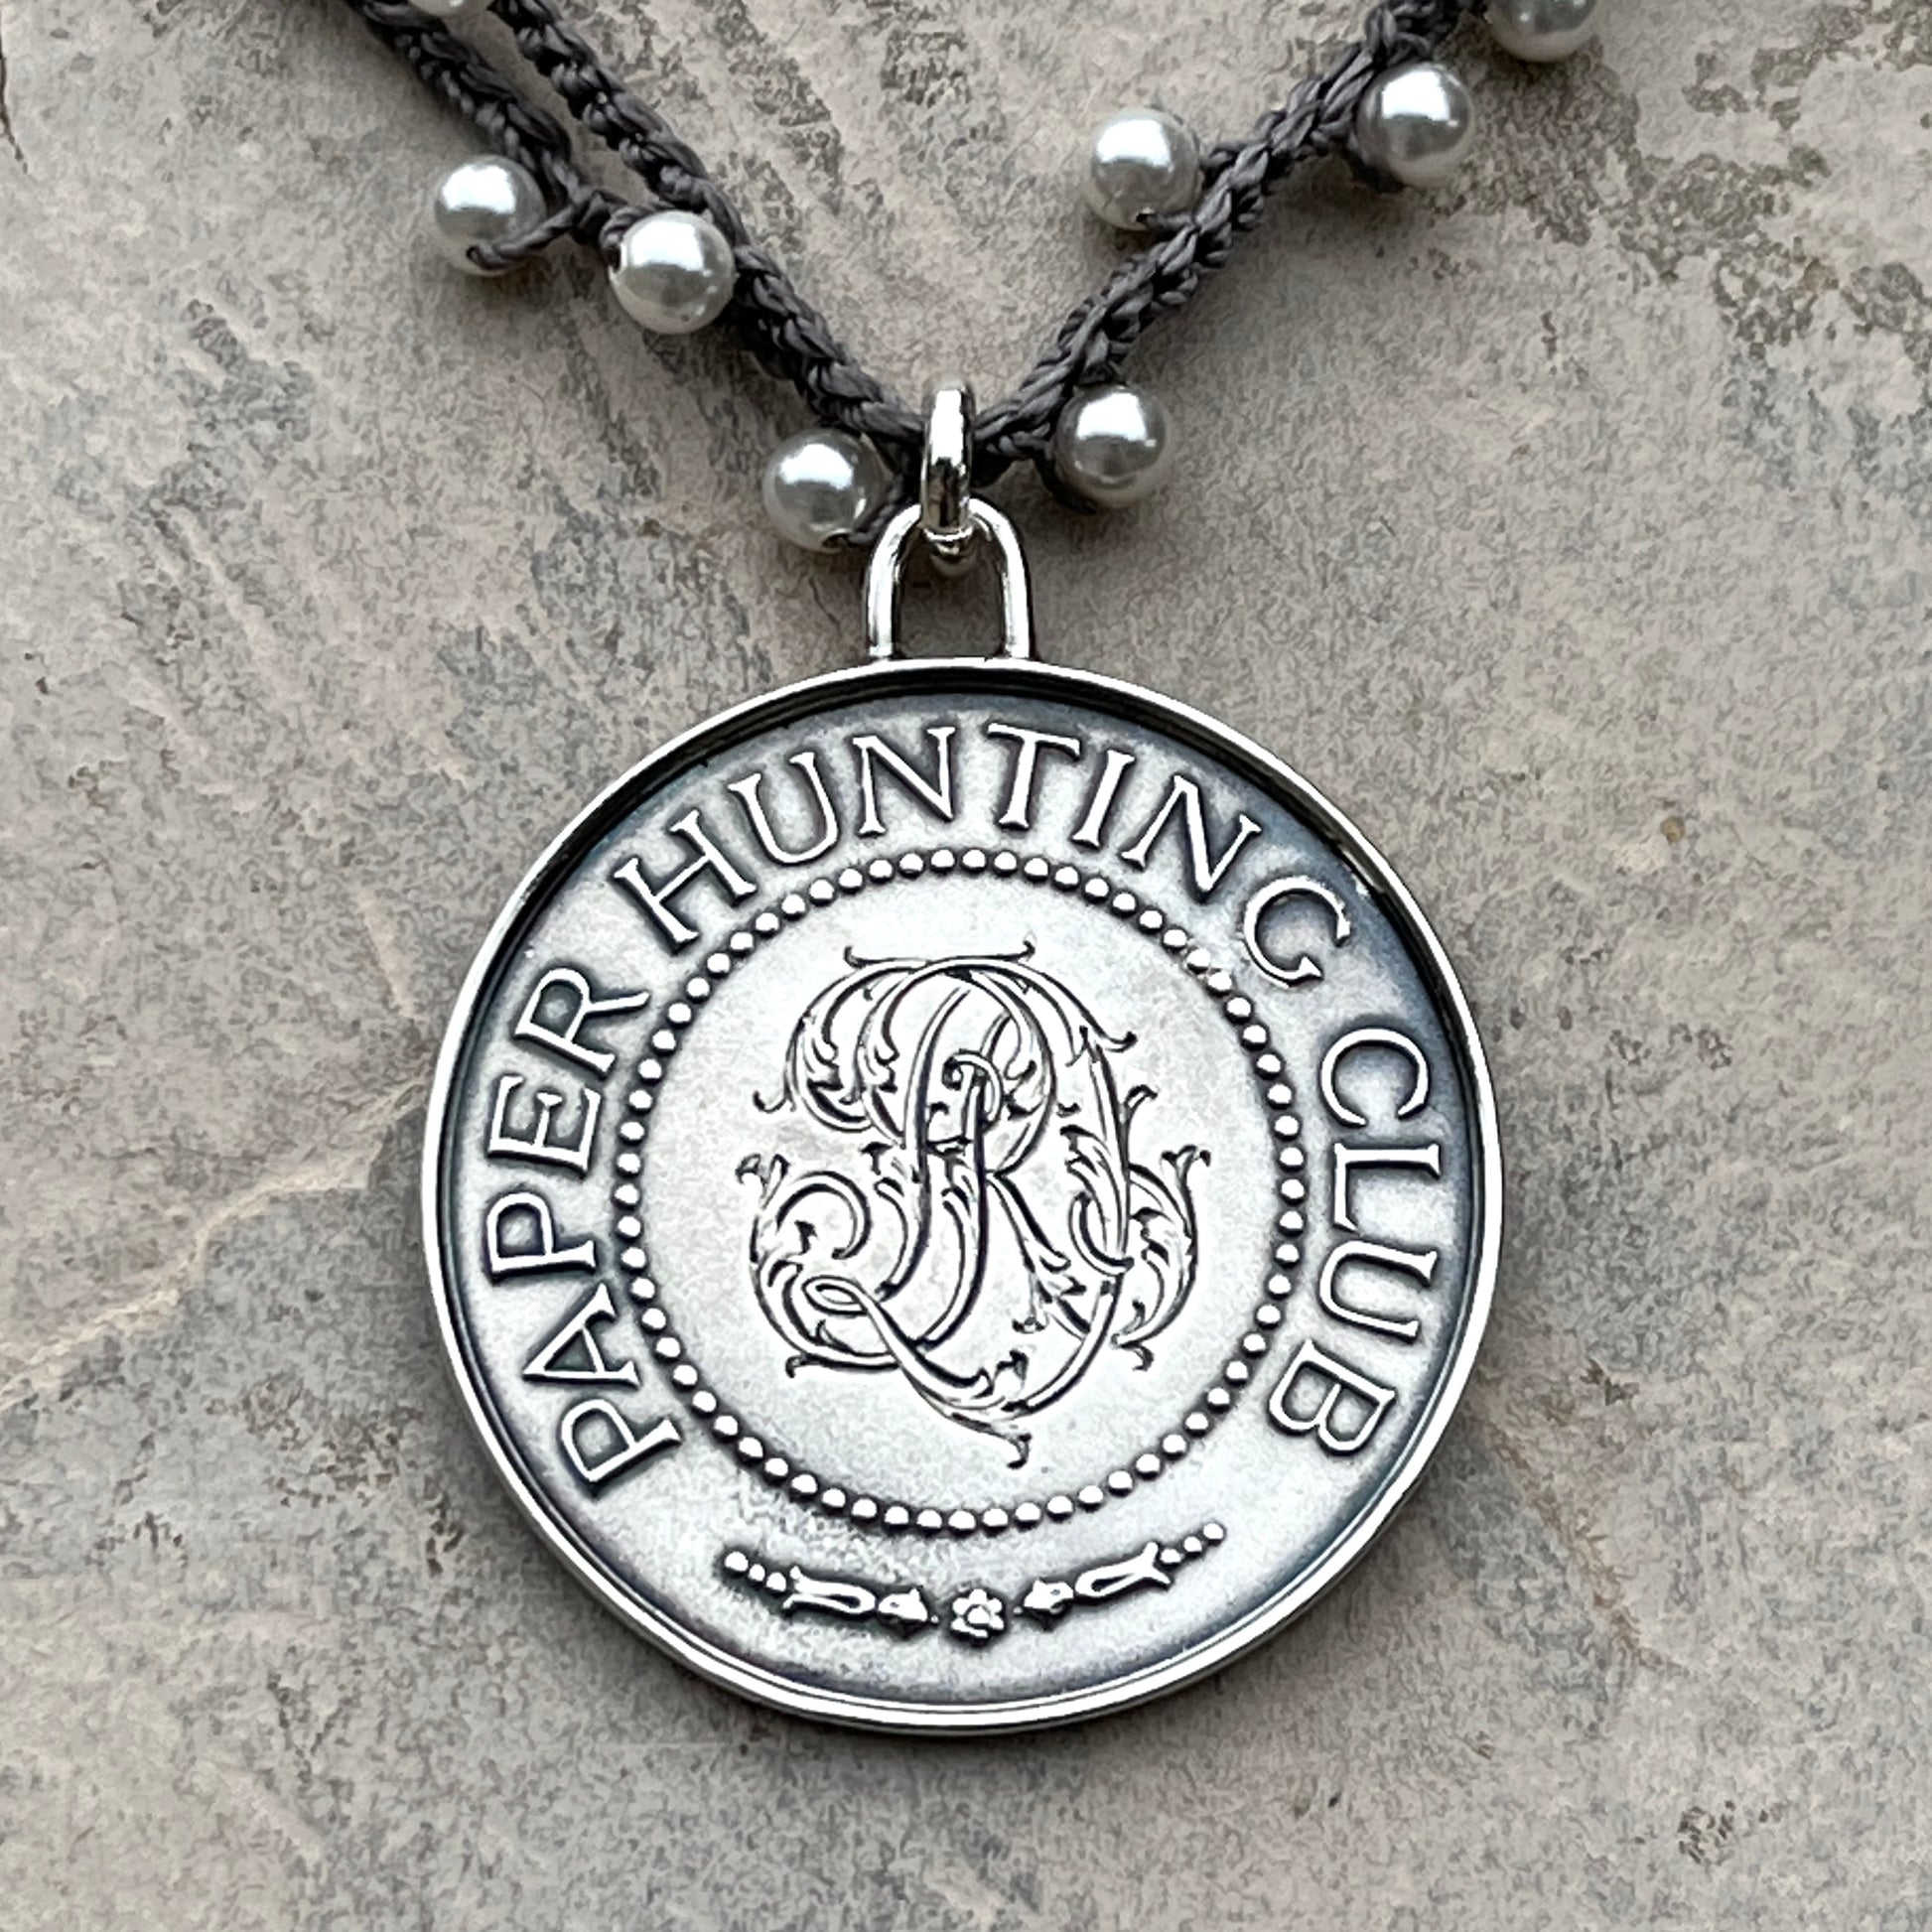 Paper Hunting Club Medal on Pearl Necklace